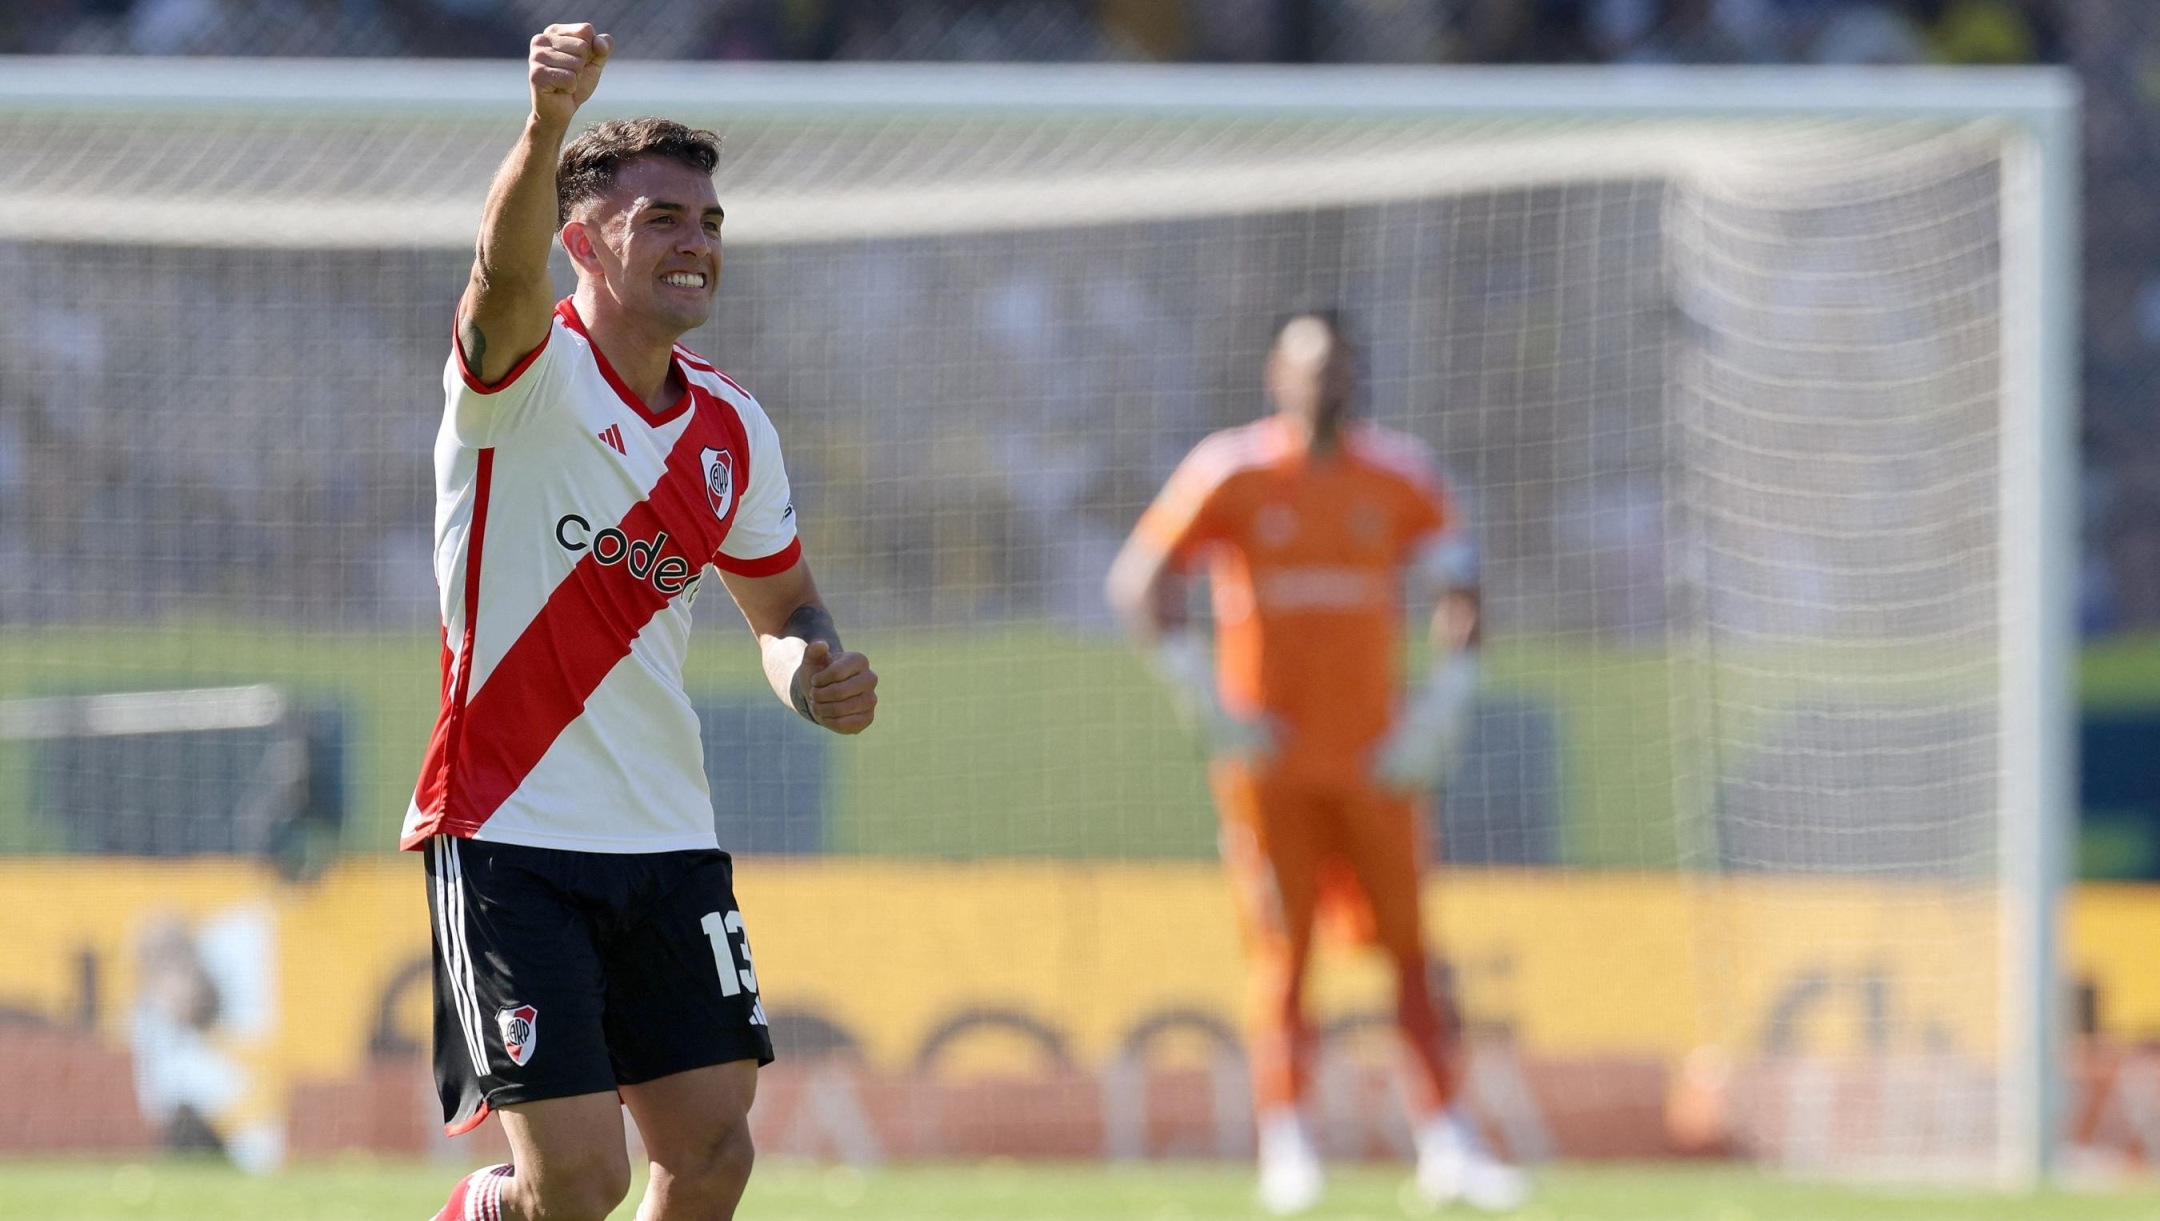 River Plate's defender Enzo Diaz celebrates after scoring the team's second goal against Boca Juniors during the Argentine Professional Football League Tournament 2023 Superclasico match at La Bombonera stadium in Buenos Aires on October 1, 2023. (Photo by ALEJANDRO PAGNI / AFP)